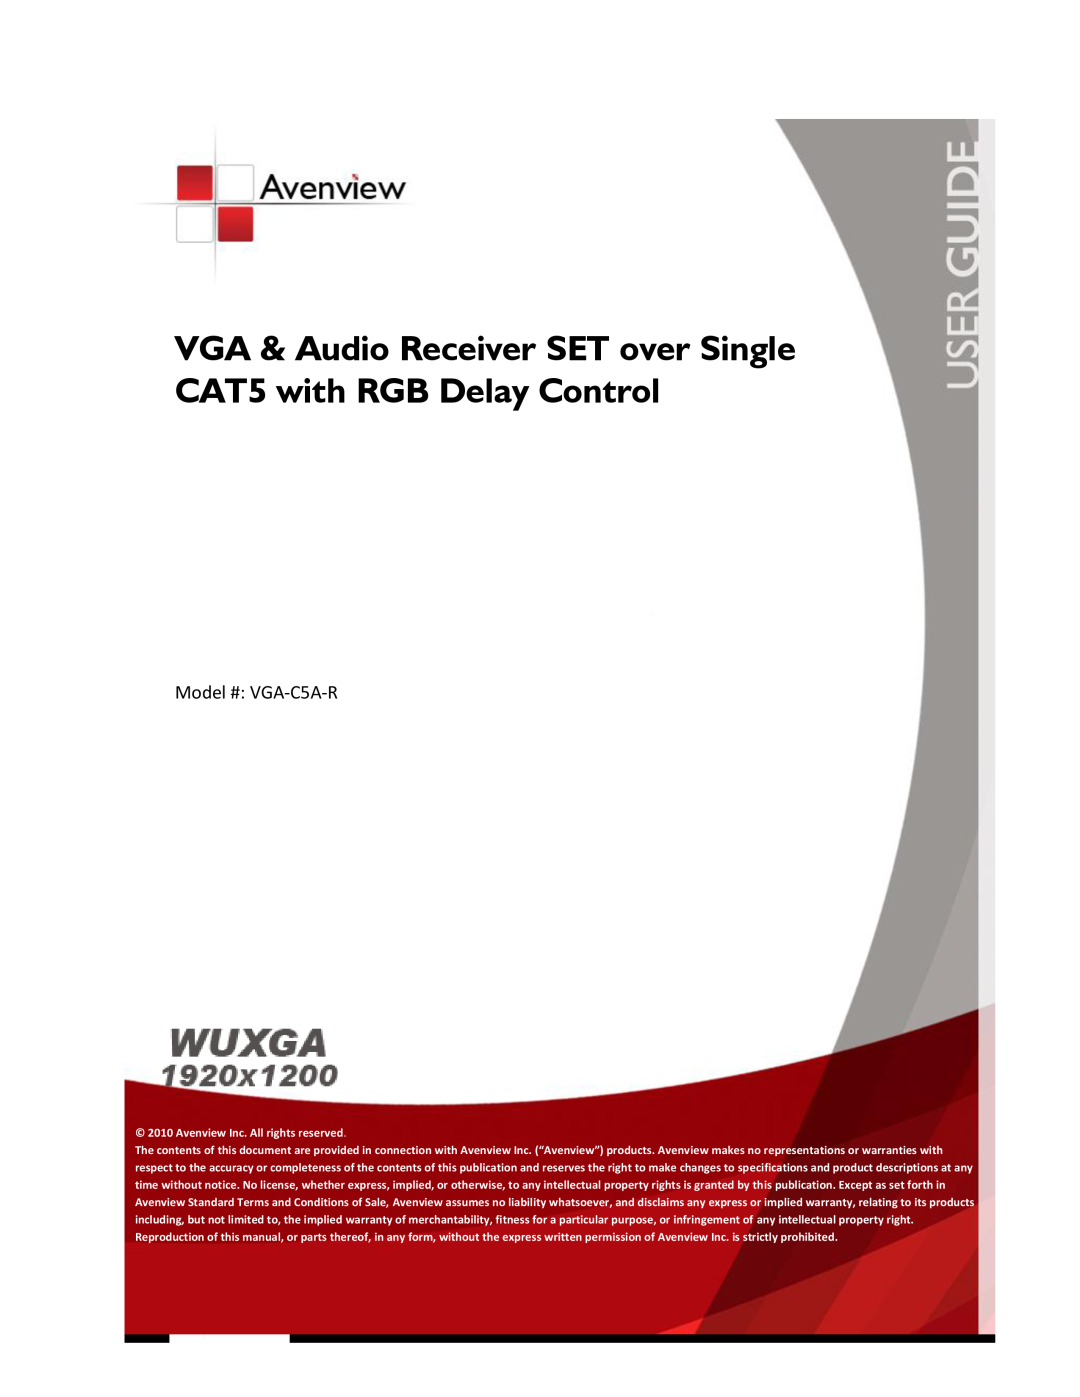 Avenview specifications Model # VGA-C5A-R, VGA & Audio Receiver SET over Single, CAT5 with RGB Delay Control 